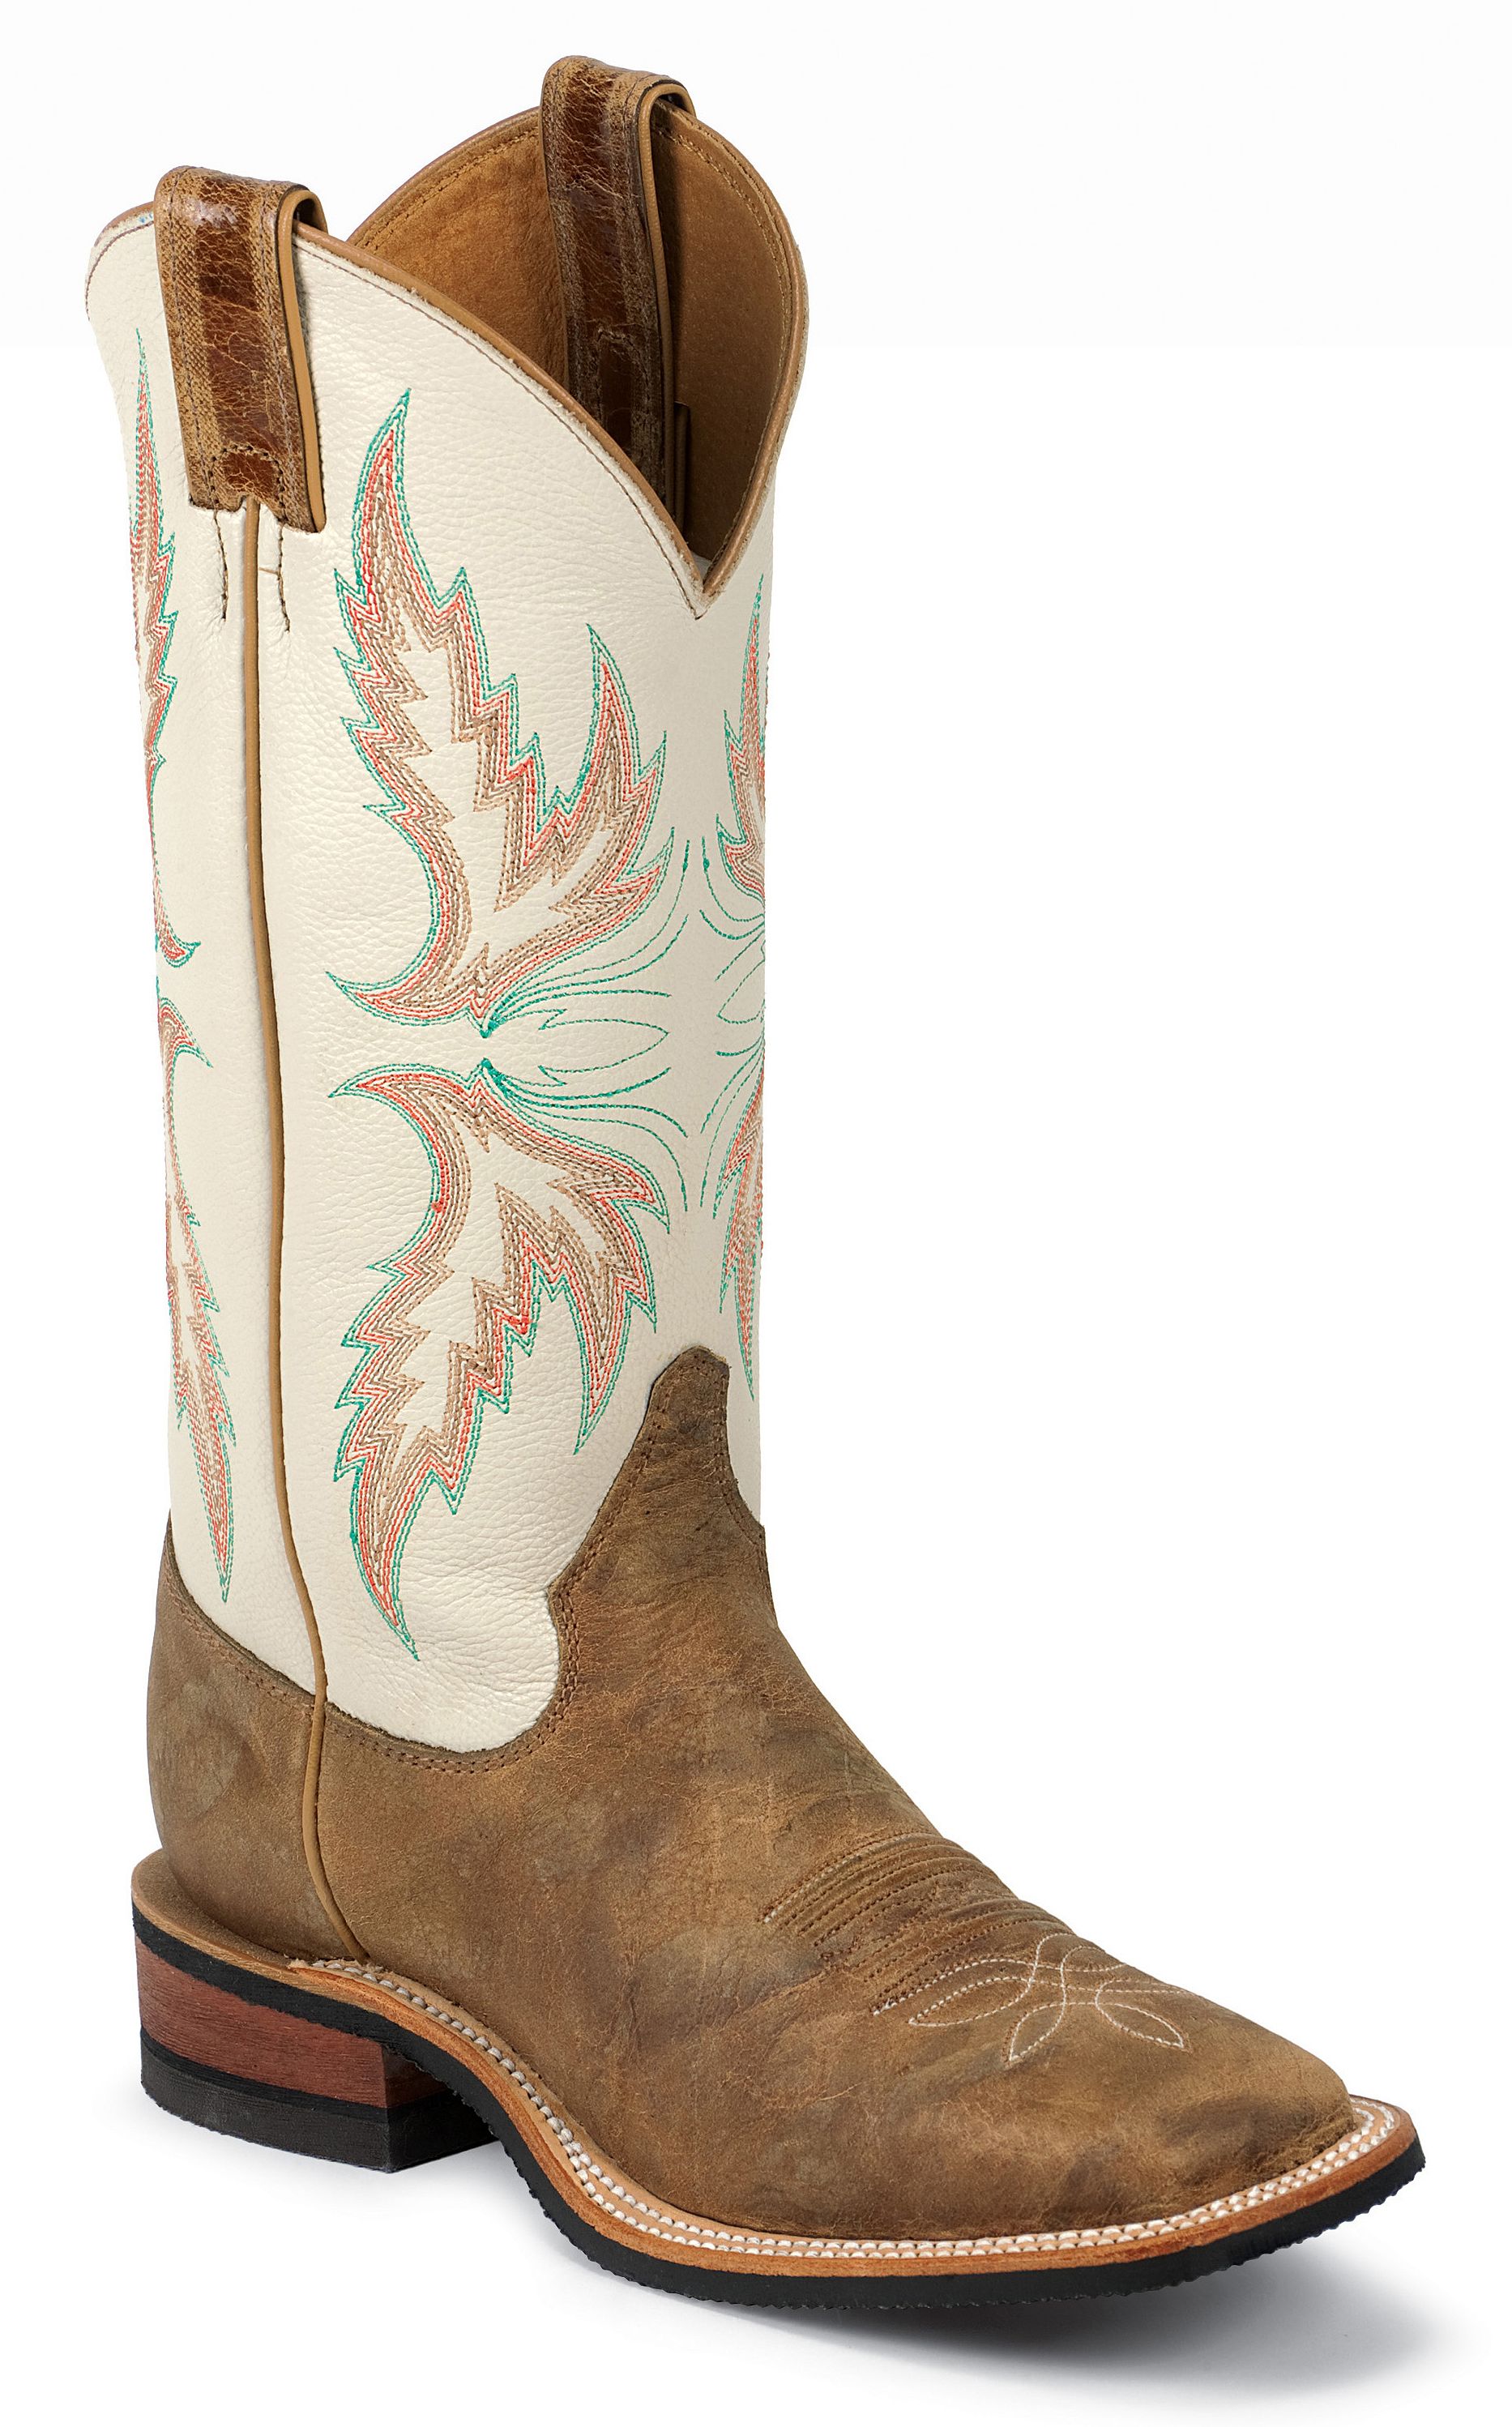 Women's Square Toe Cowgirl Boots - Sheplers